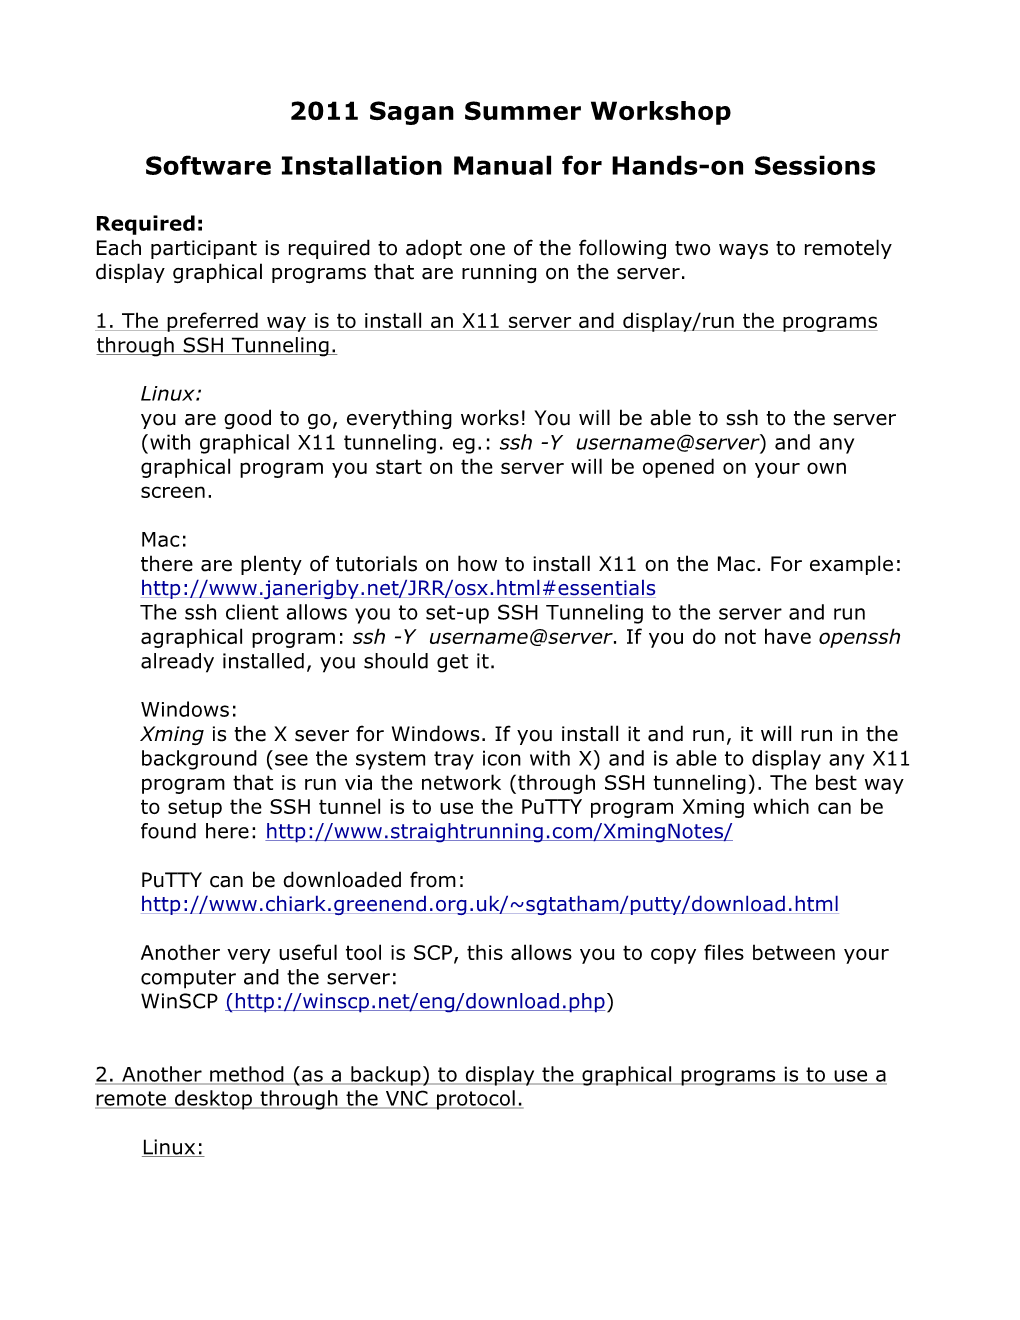 Software Installation Manual for Hands-On Sessions